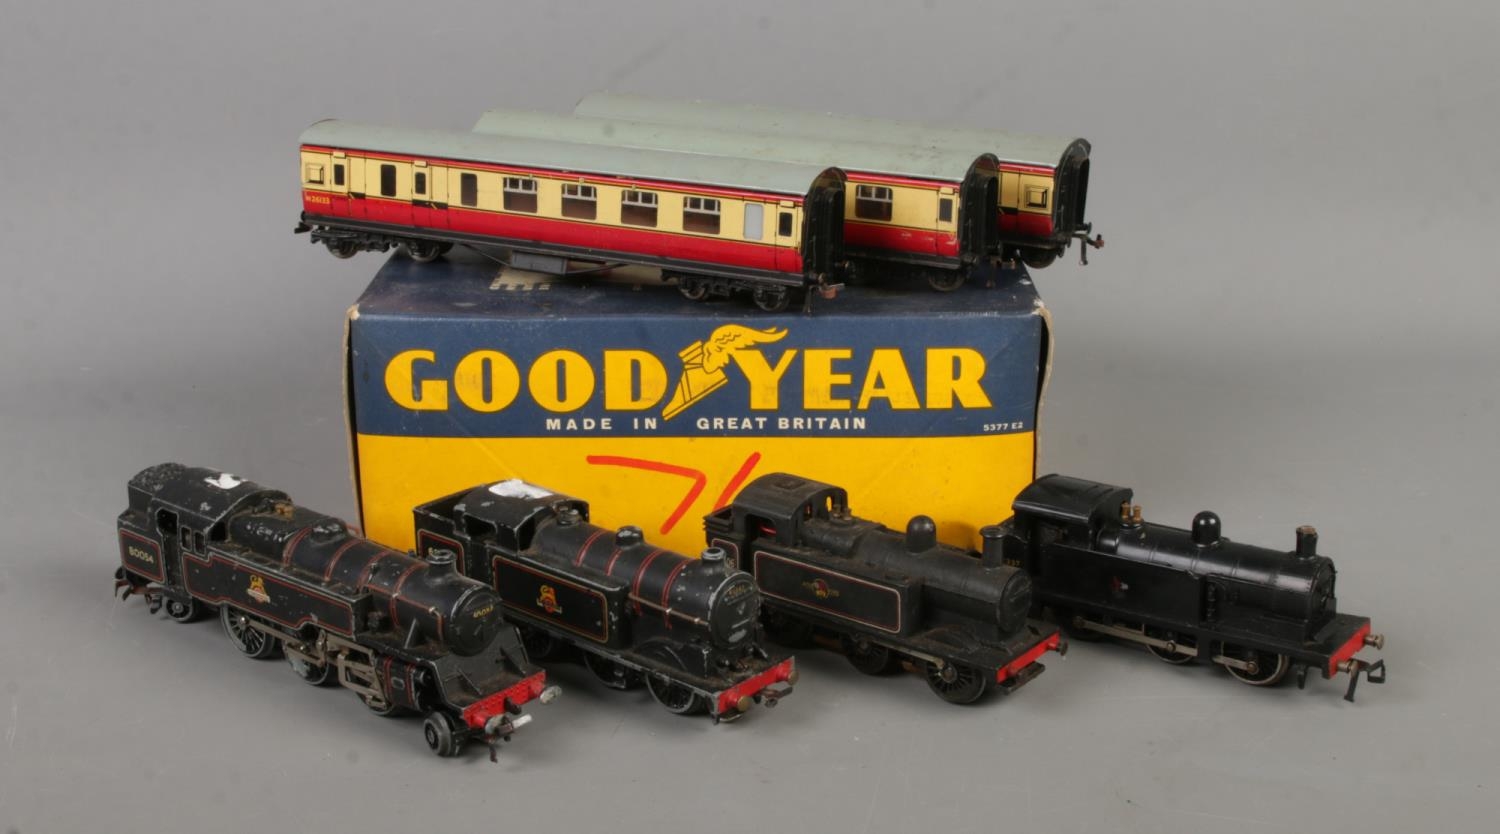 Four Hornby OO Gauge Locomotives to include 69567, 47606, 80054 and 31337. All in black livery.